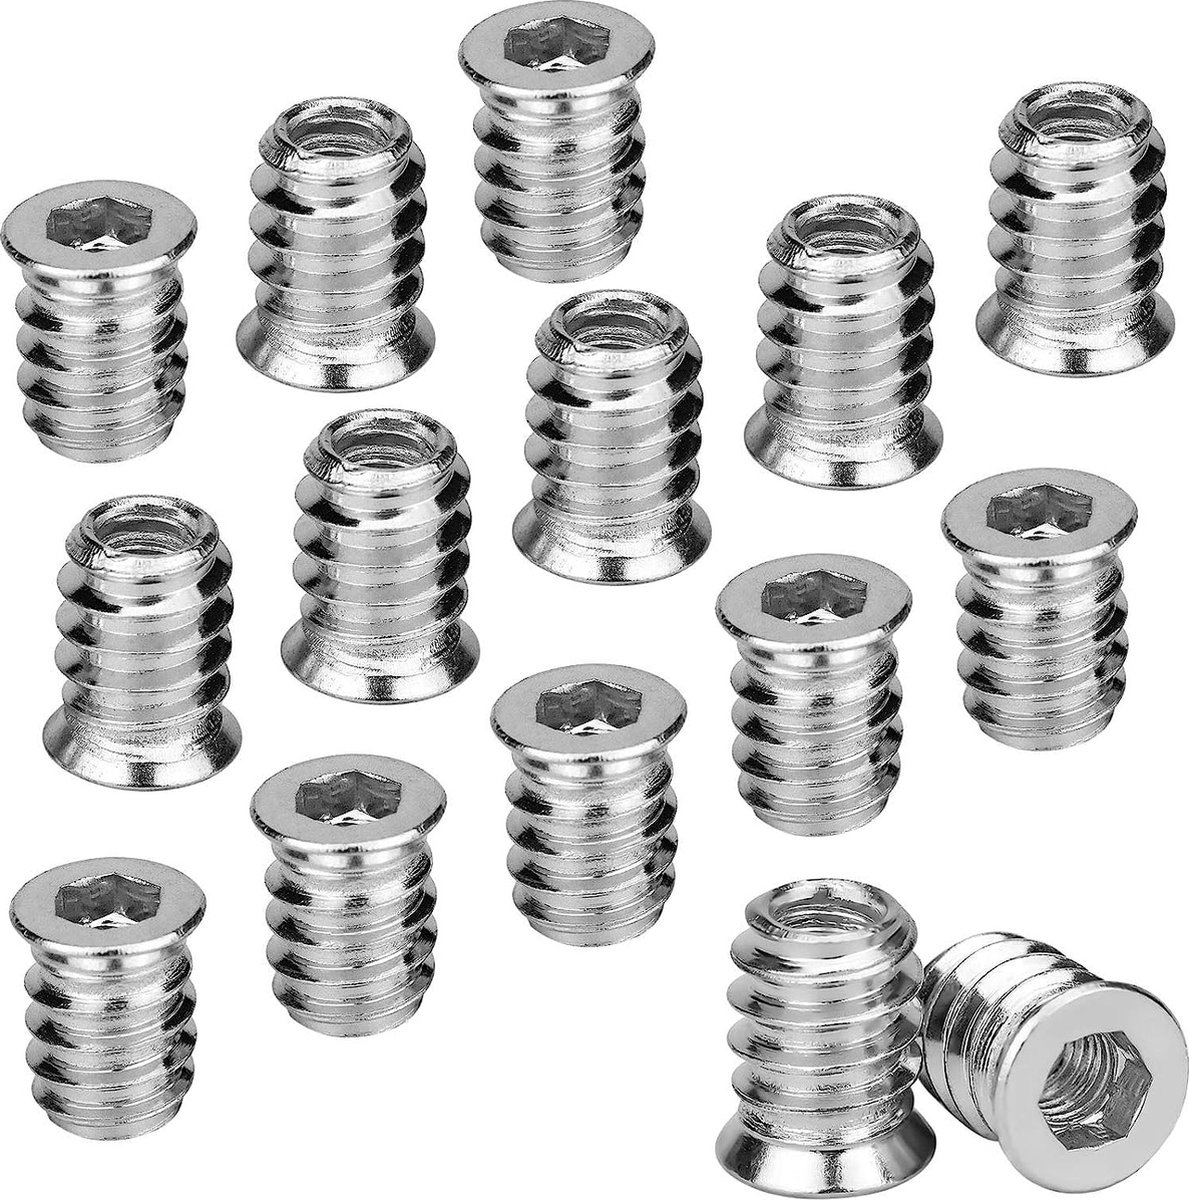 100 x Screw-In Nuts M6 Sockets Screw-In Sleeve M6 x 15 mm Screw-In Nut with Covering Edge Threaded Insert Hex Allen Nuts Made of Galvanised Steel